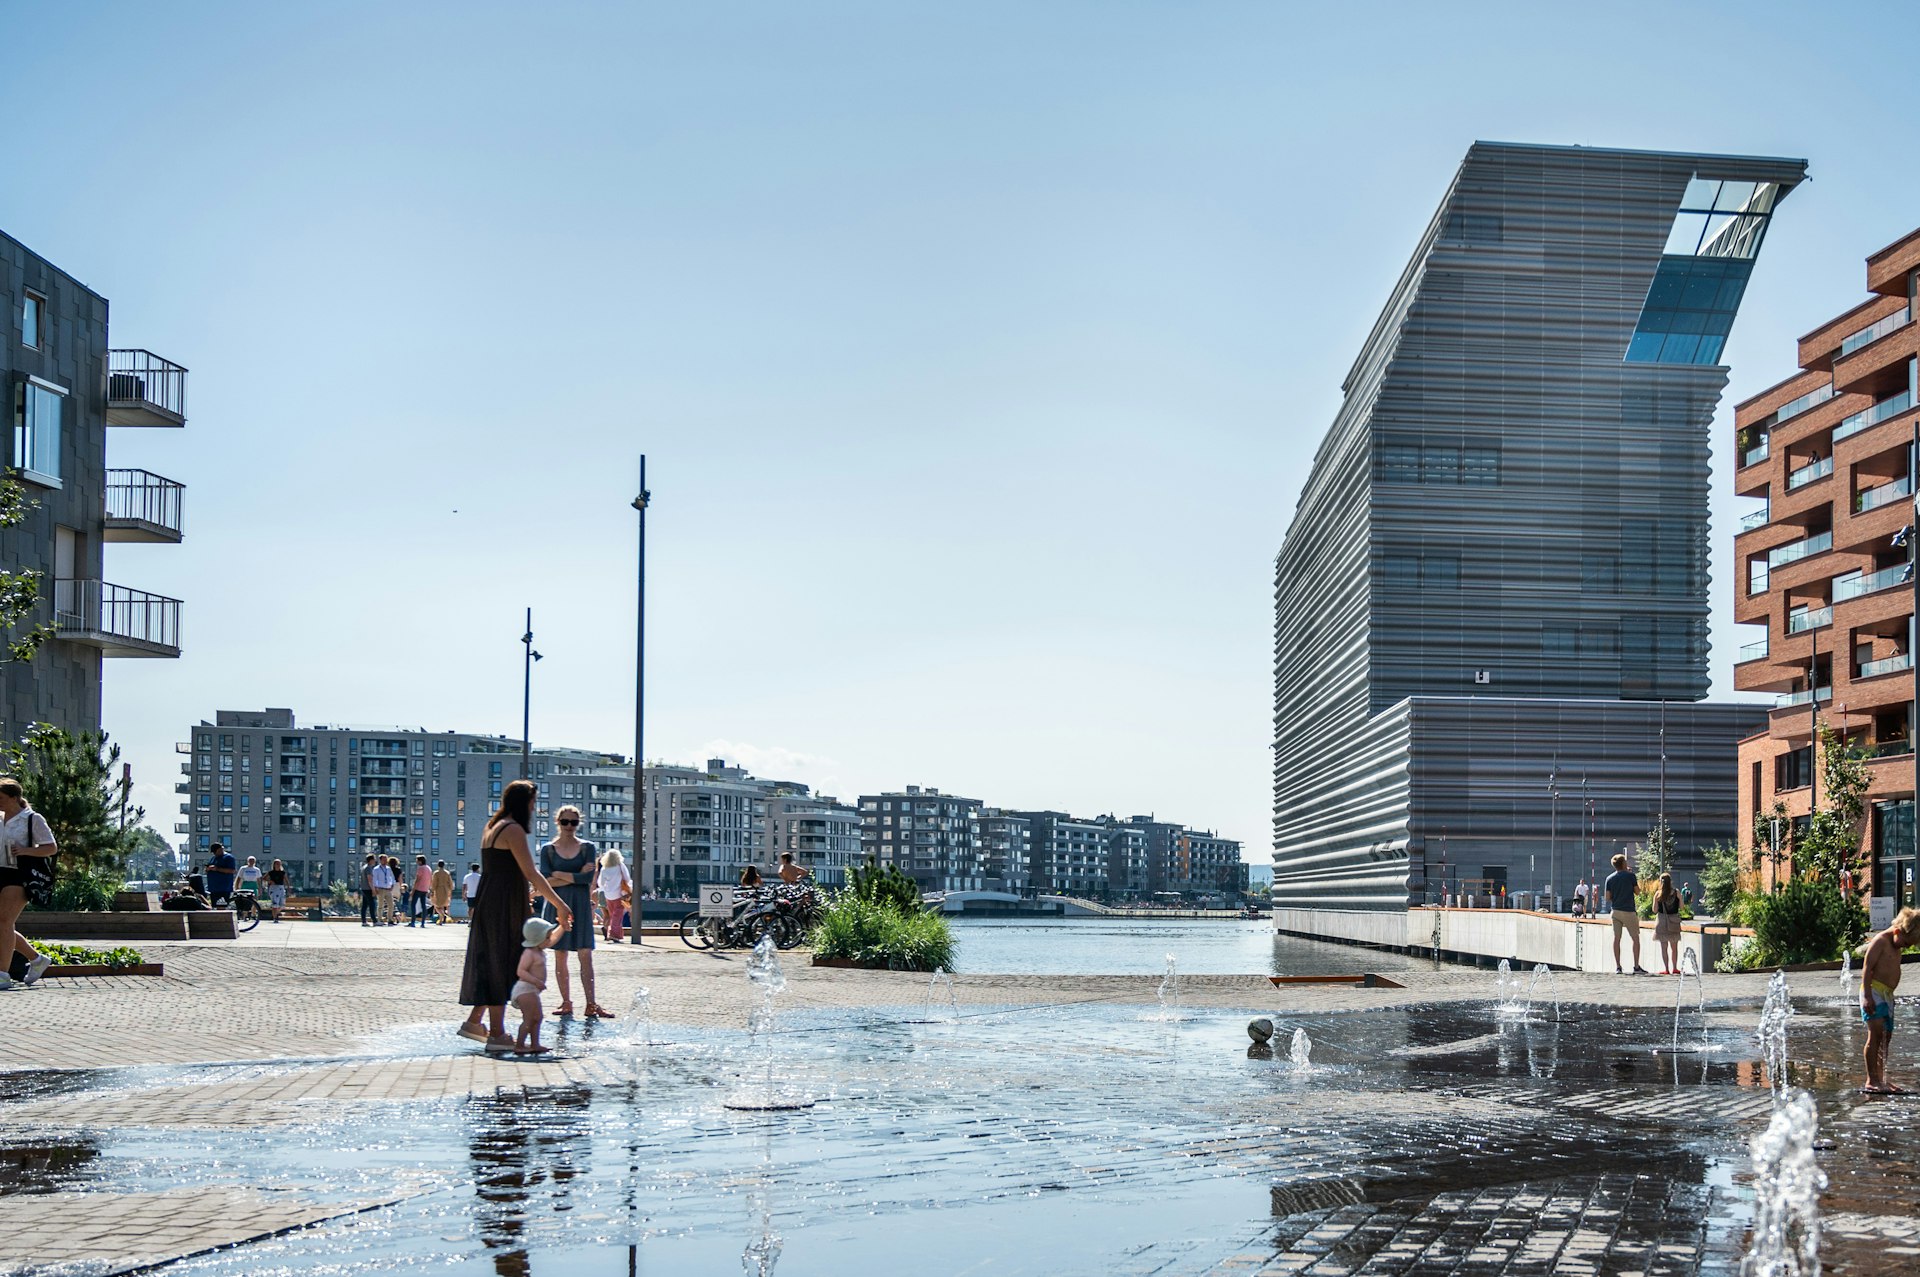 Exterior shot of Oslo's new waterfront Munch museum with people wading in the water